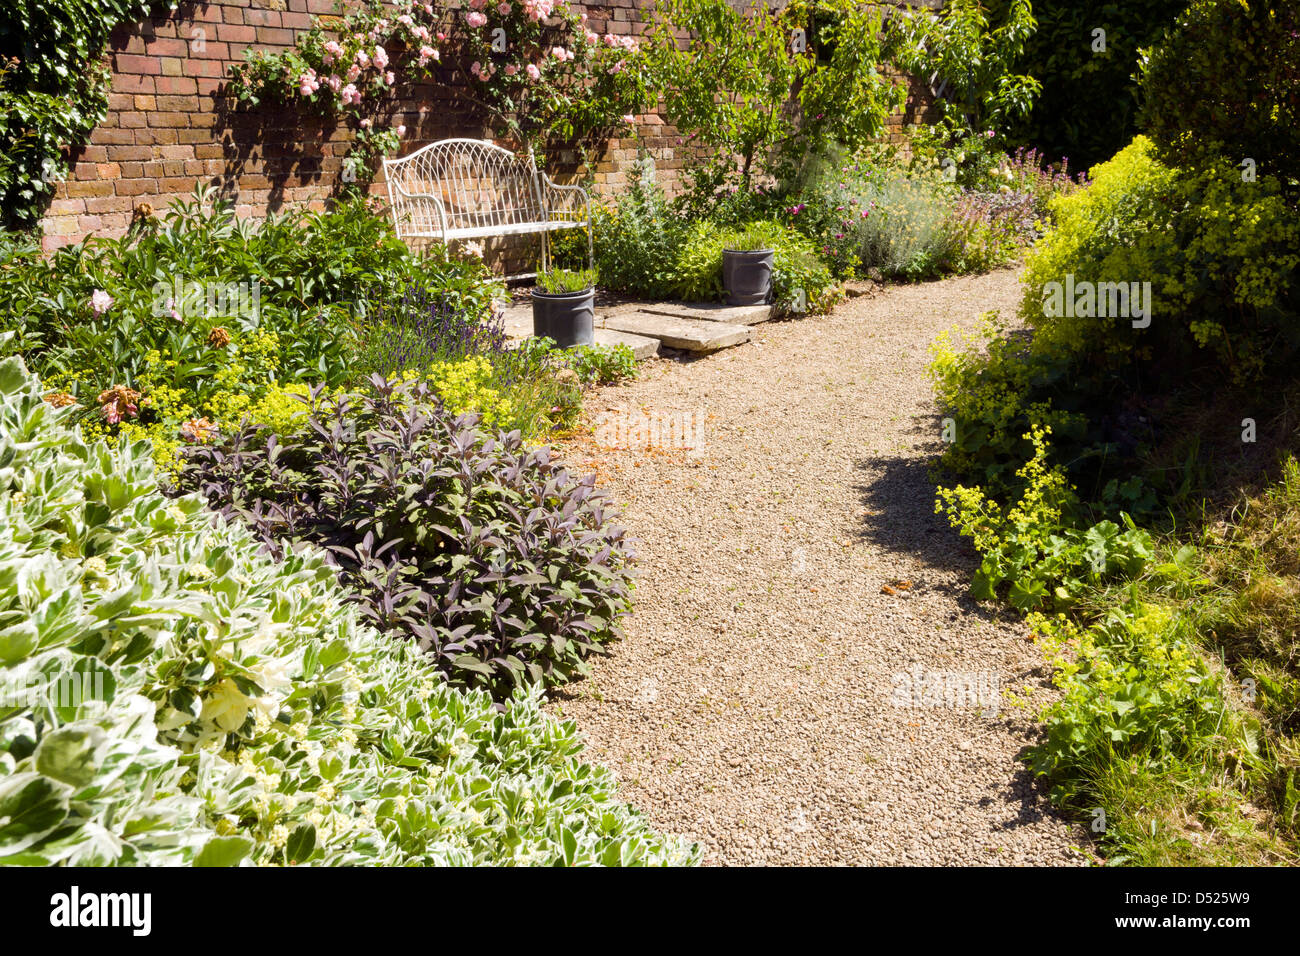 UK gardens. A gravelled path leading to a bench in a walled garden with mature shrub and flower borders. Stock Photo